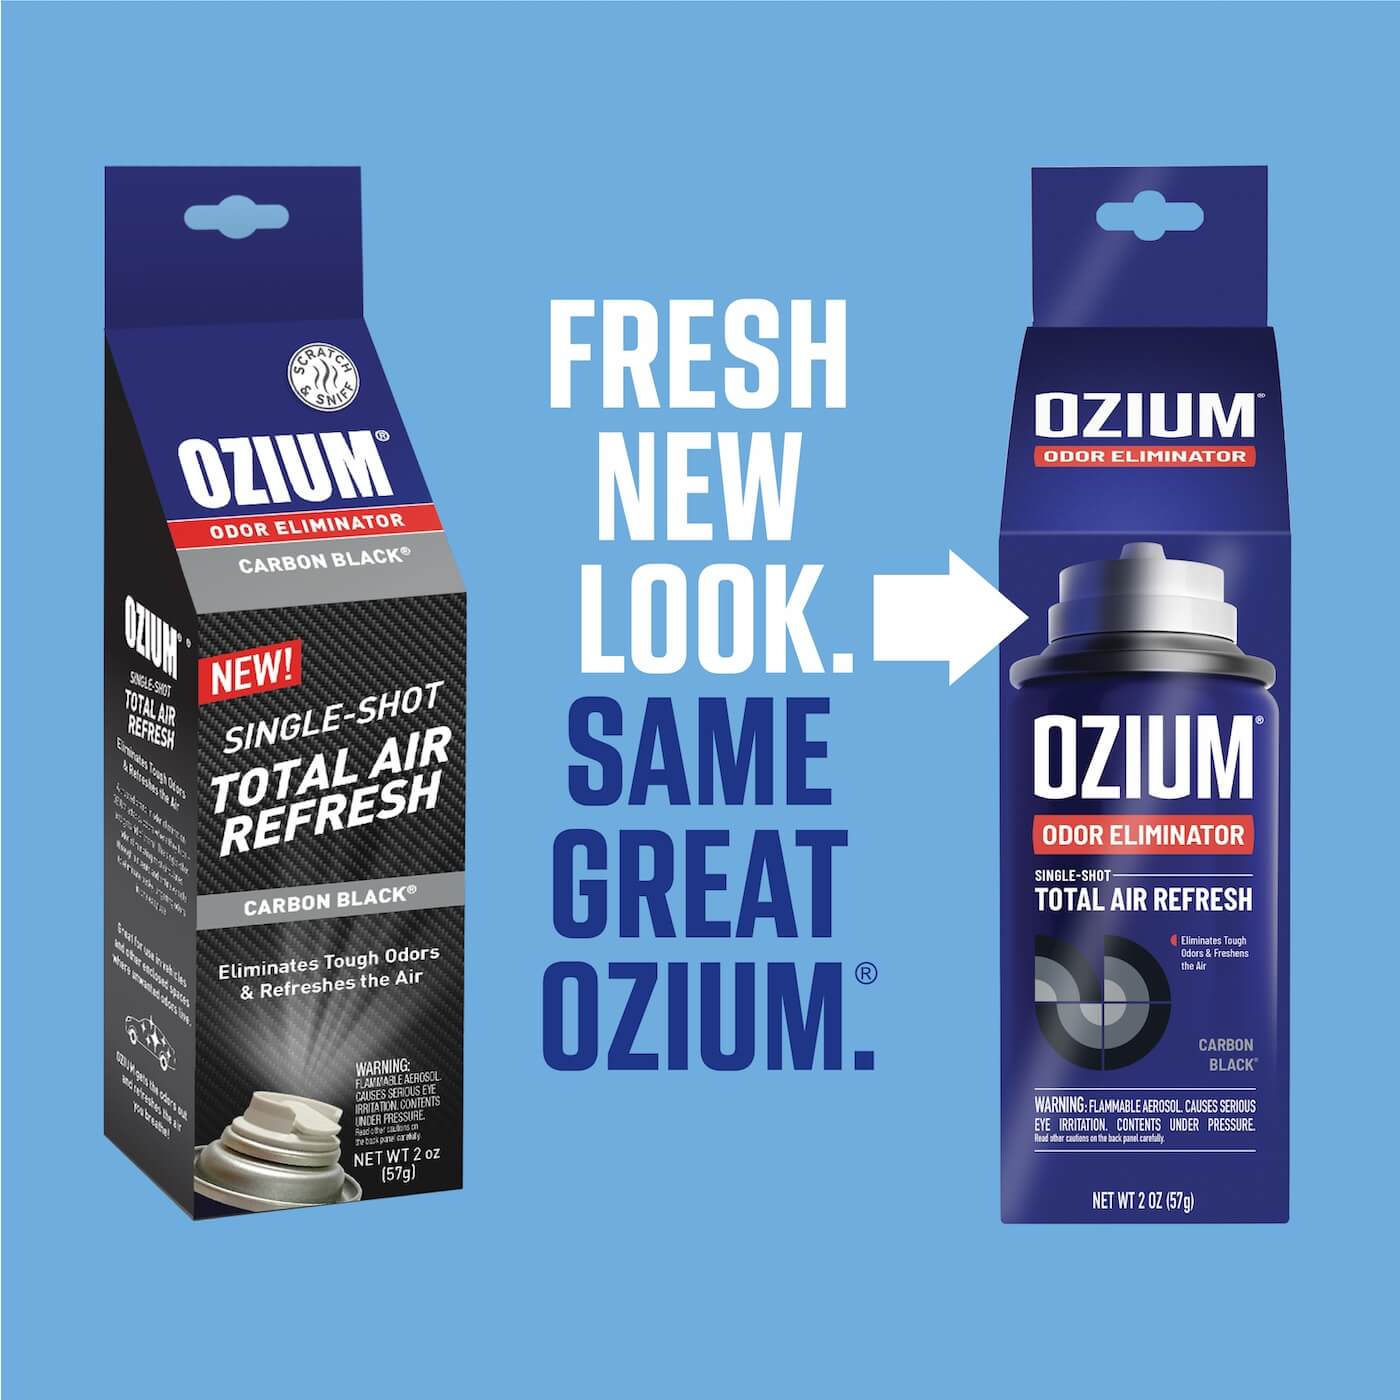 Fresh New Look. Same Great Ozium. A picture of old packaging and a picture of new packaging